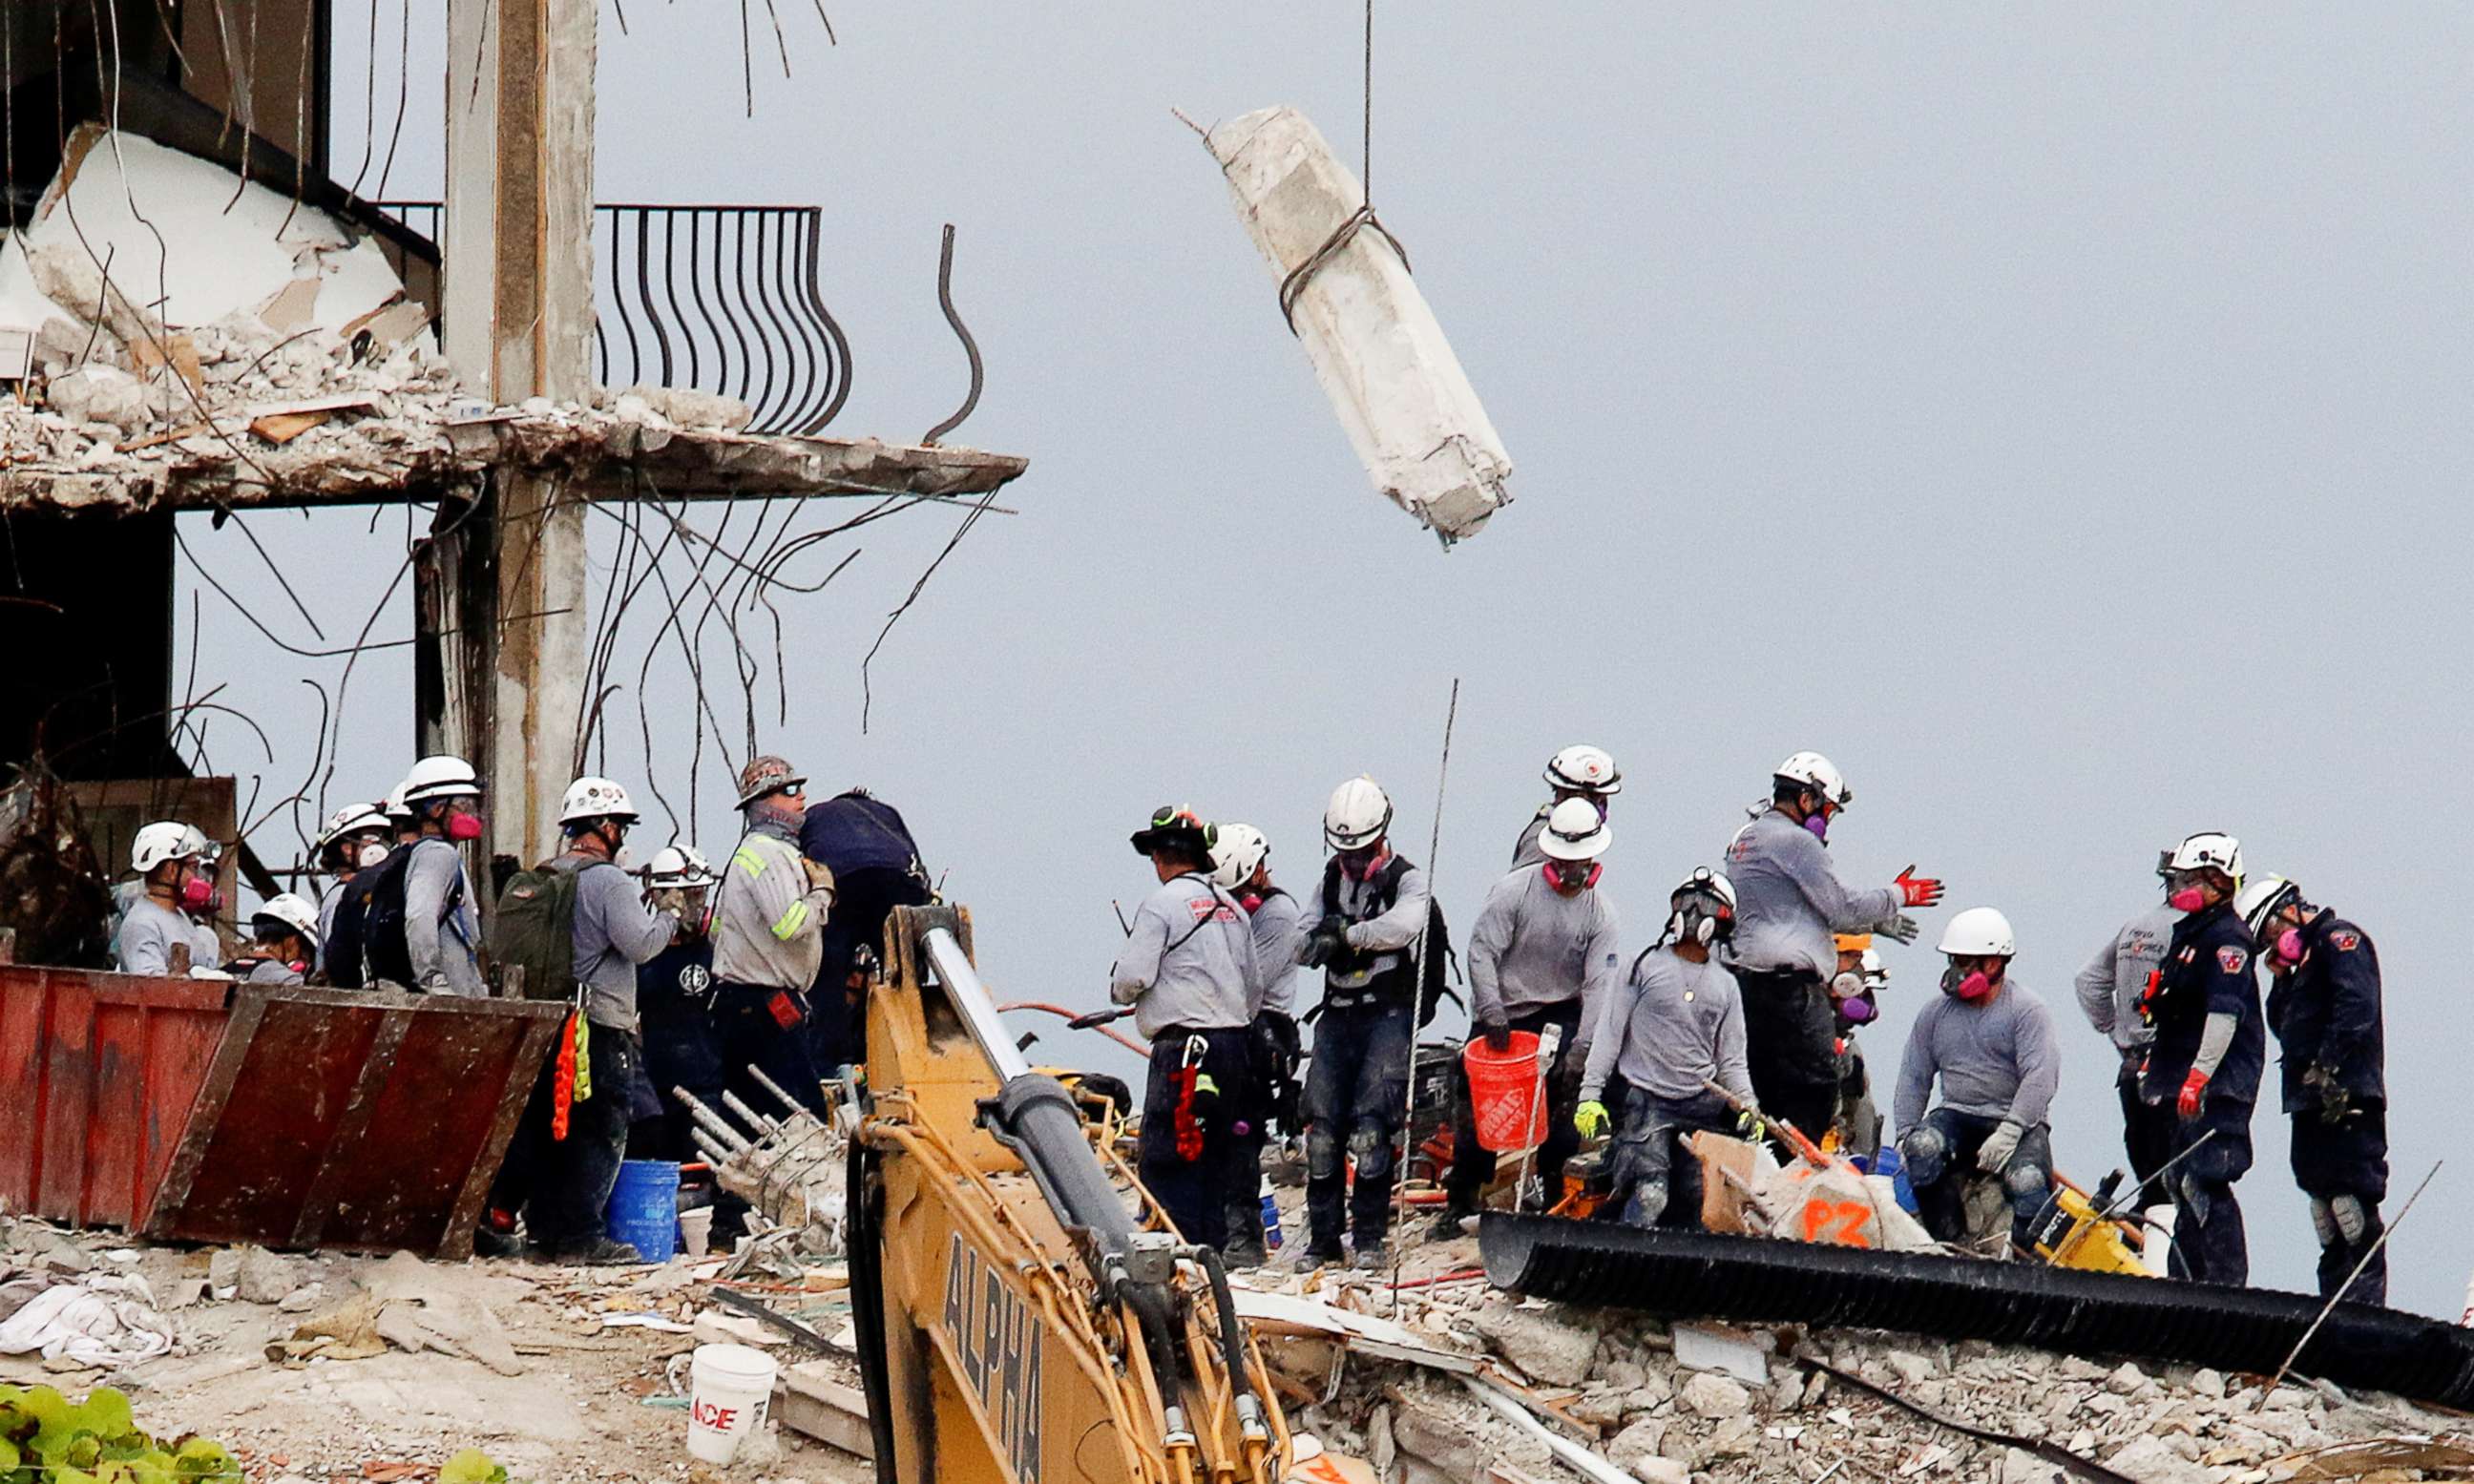 PHOTO: Emergency workers conduct search and rescue efforts at the site of a partially collapsed residential building in Surfside, near Miami Beach, Fla., June 30, 2021.